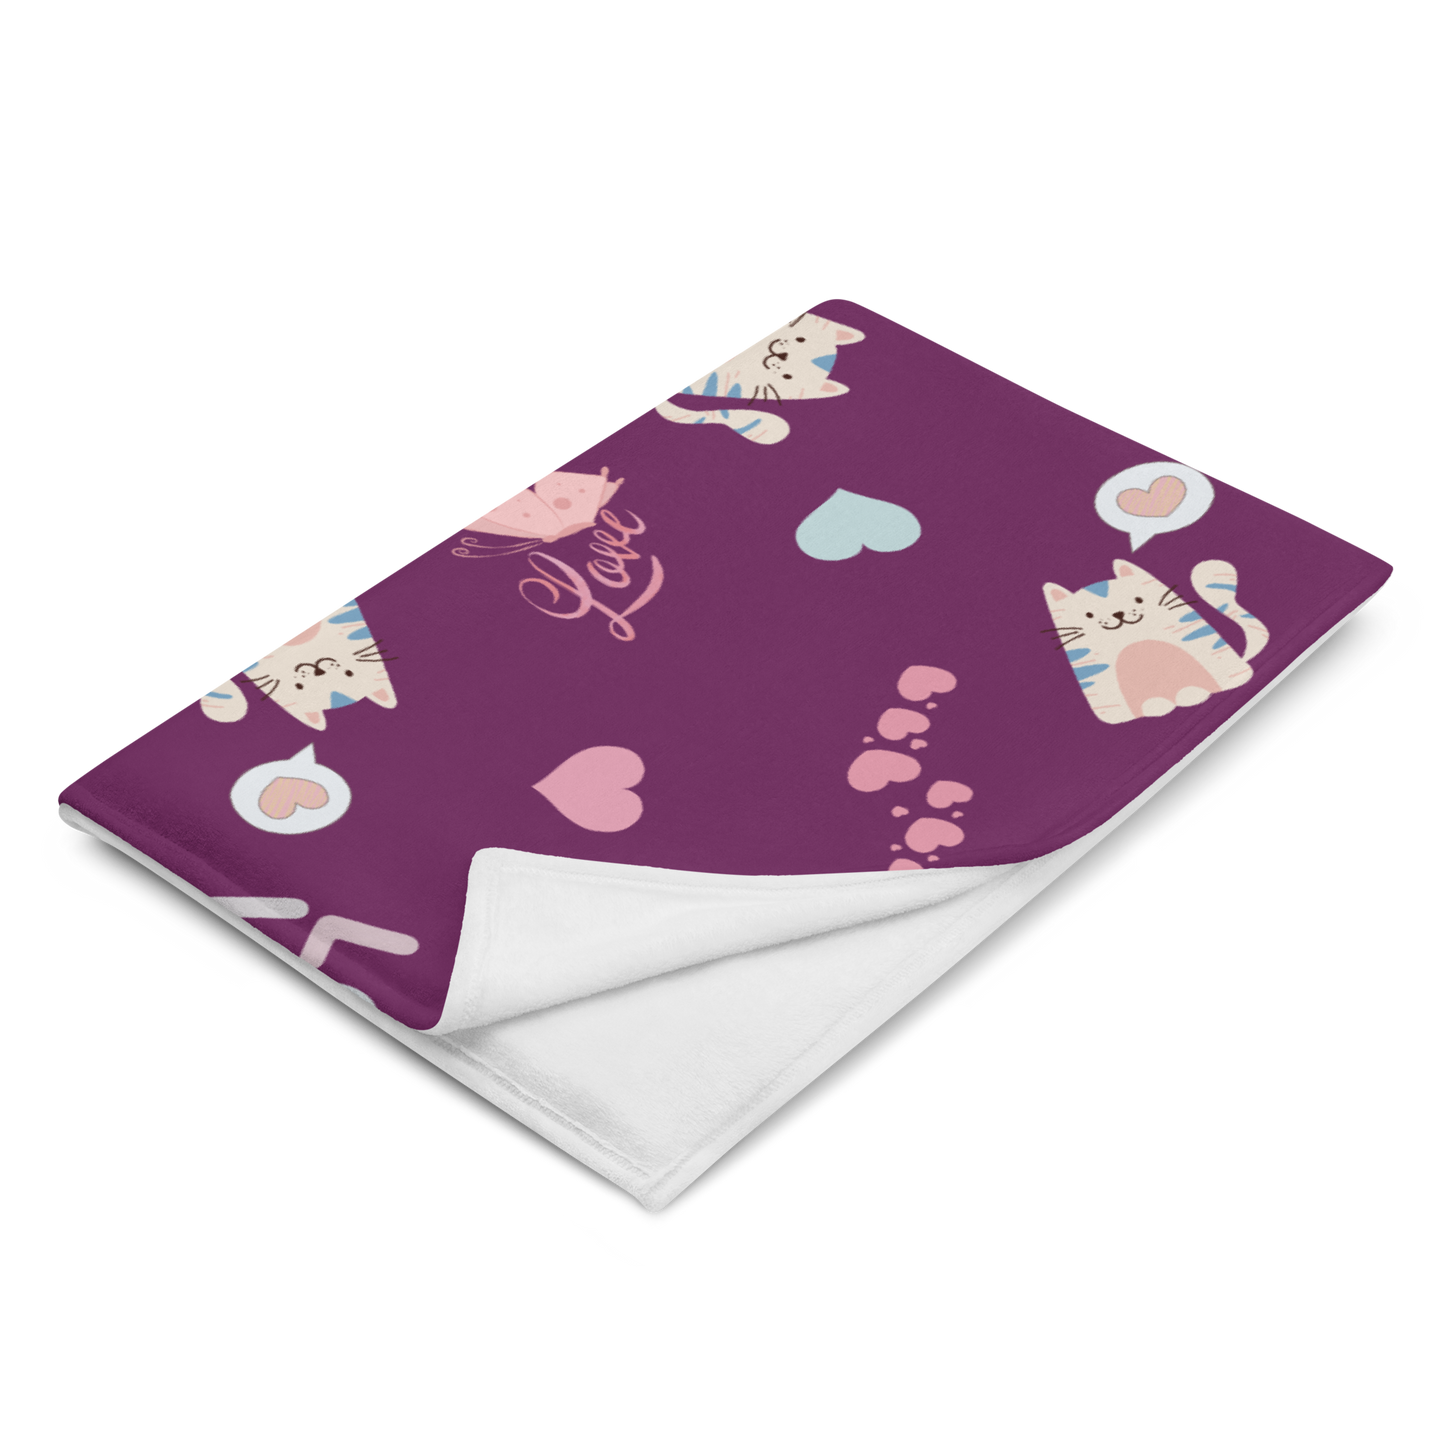 Throw Blanket | Adorable Cat Love Themed with Purple Background